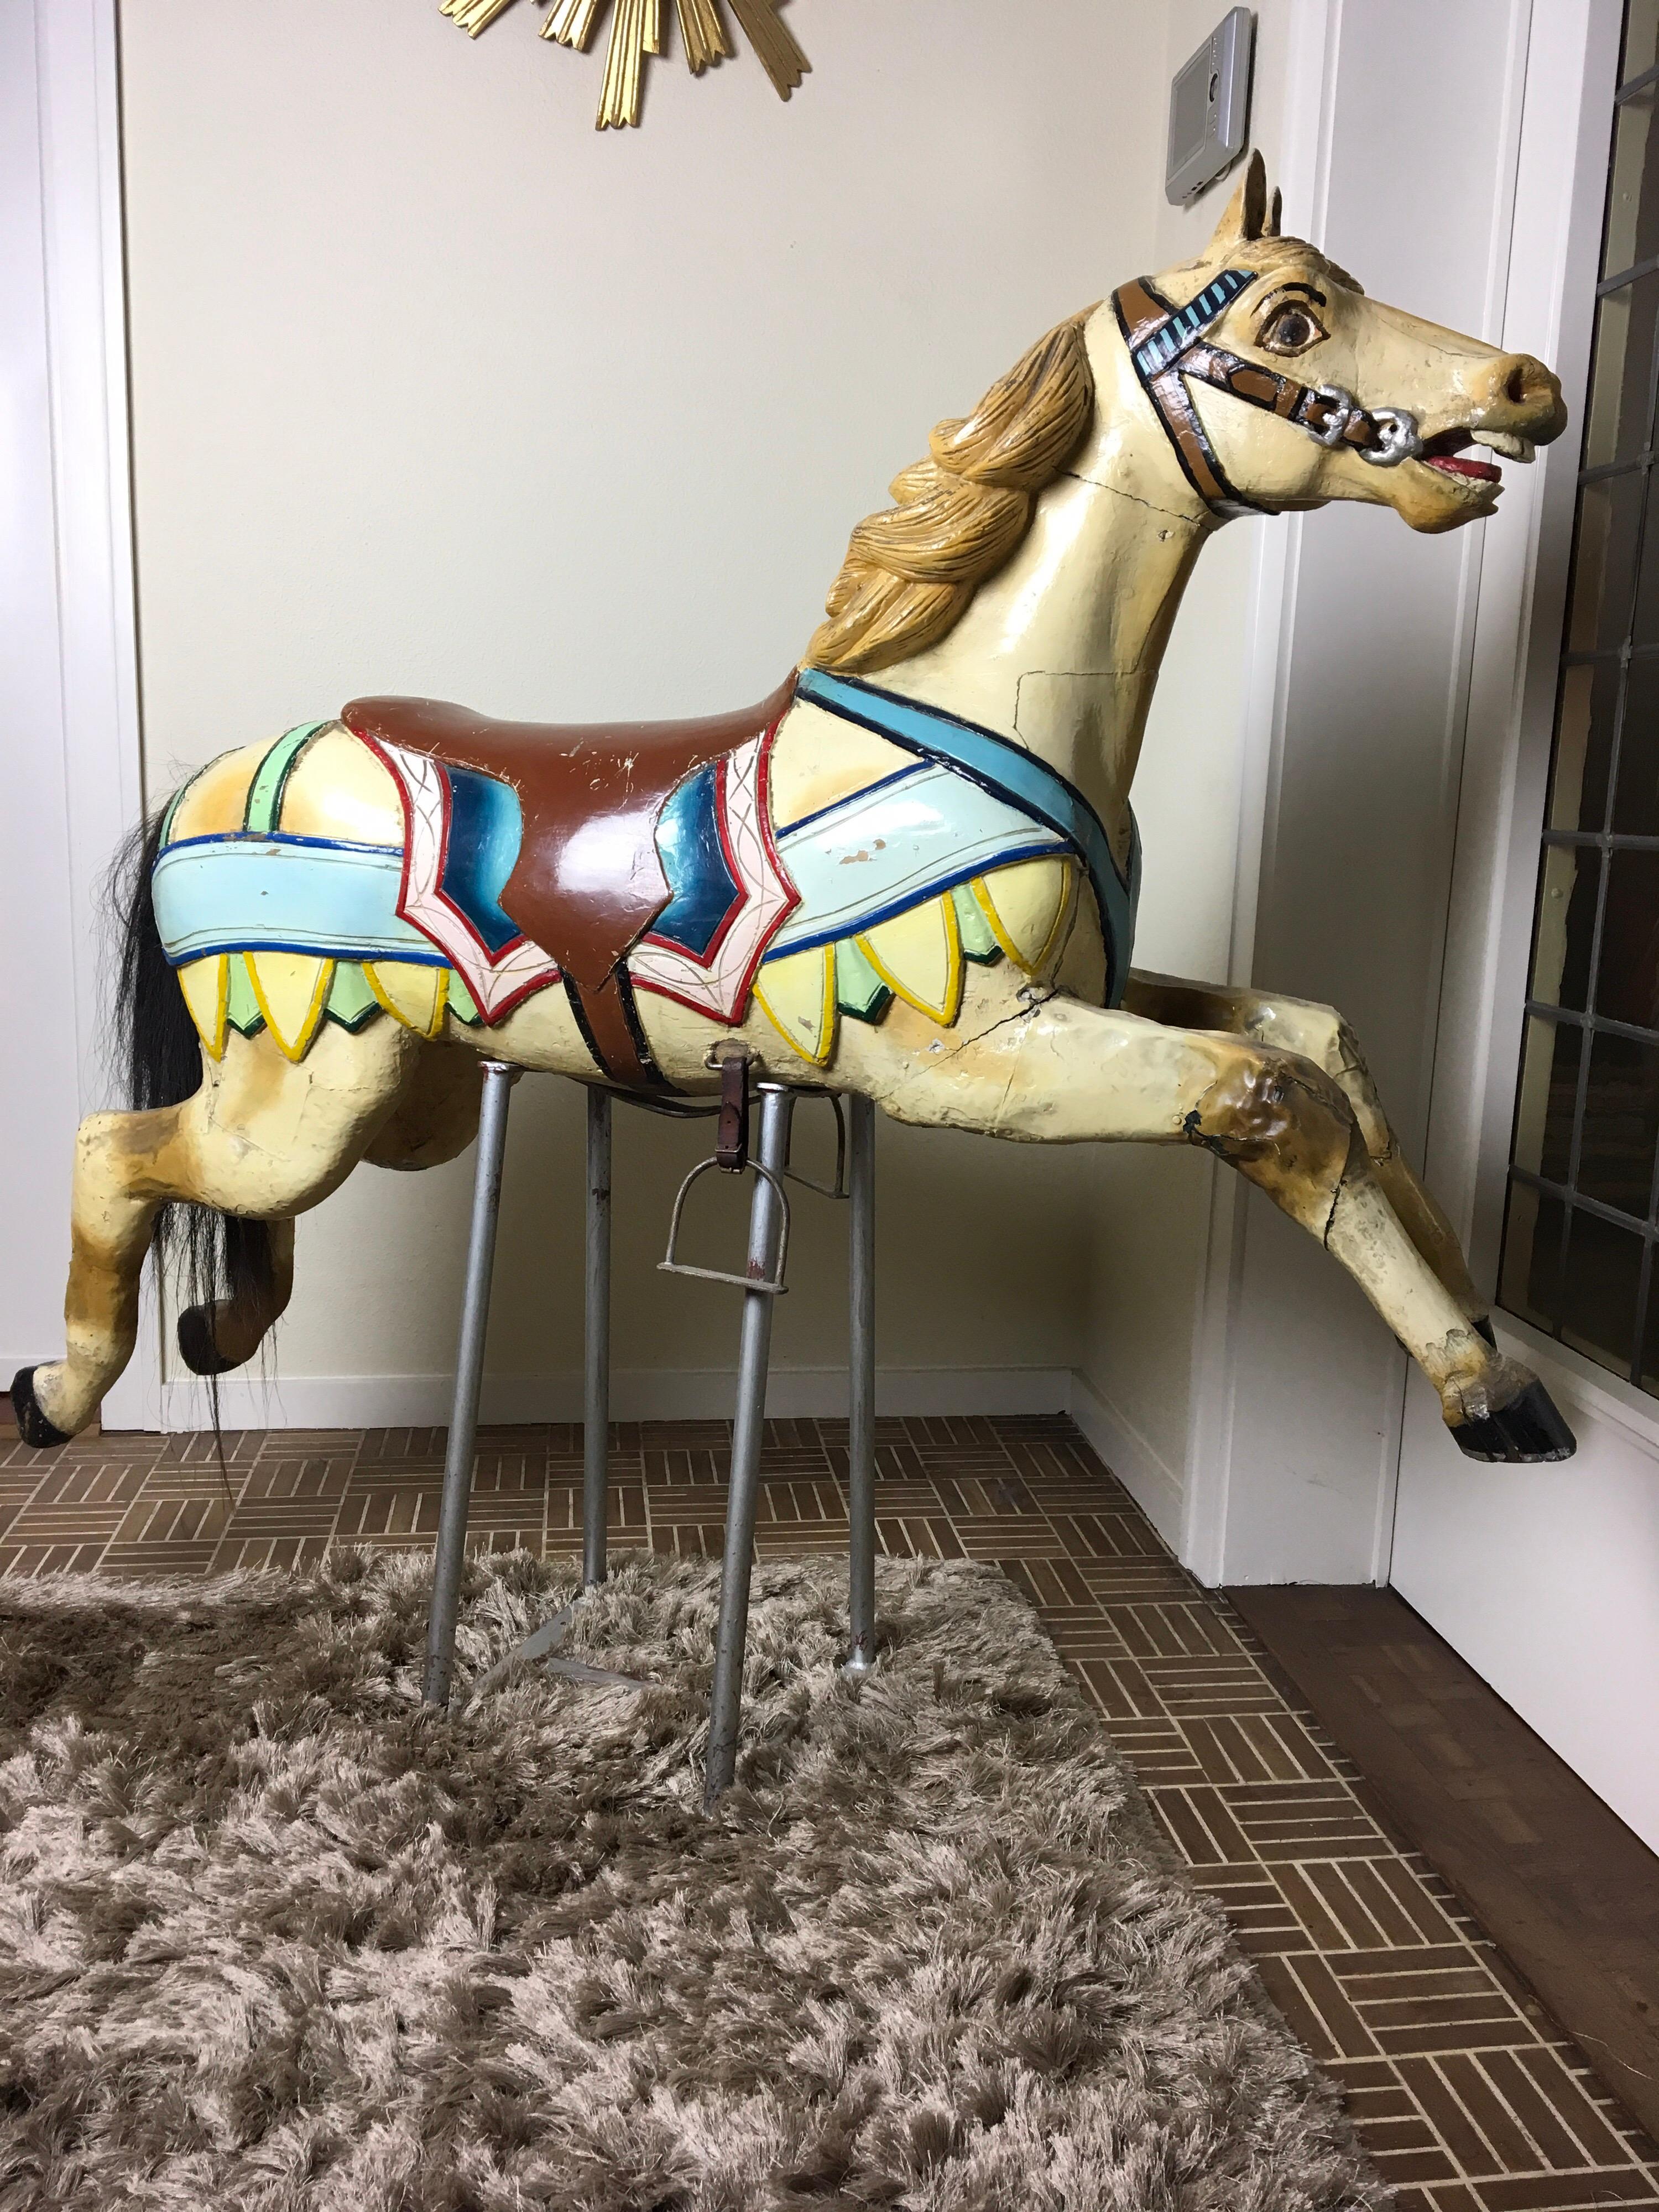 Antique Carousel horse by J.Hübner. 
A hand-carved wooden carousel horse made by Atelier Hübner Germany - Josef Hübner - Joseph Hubner. 
This piece of Carnival Art - funfair roundabout horse - Merry-go-round Horse 
dates circa 1910 and has sulfide